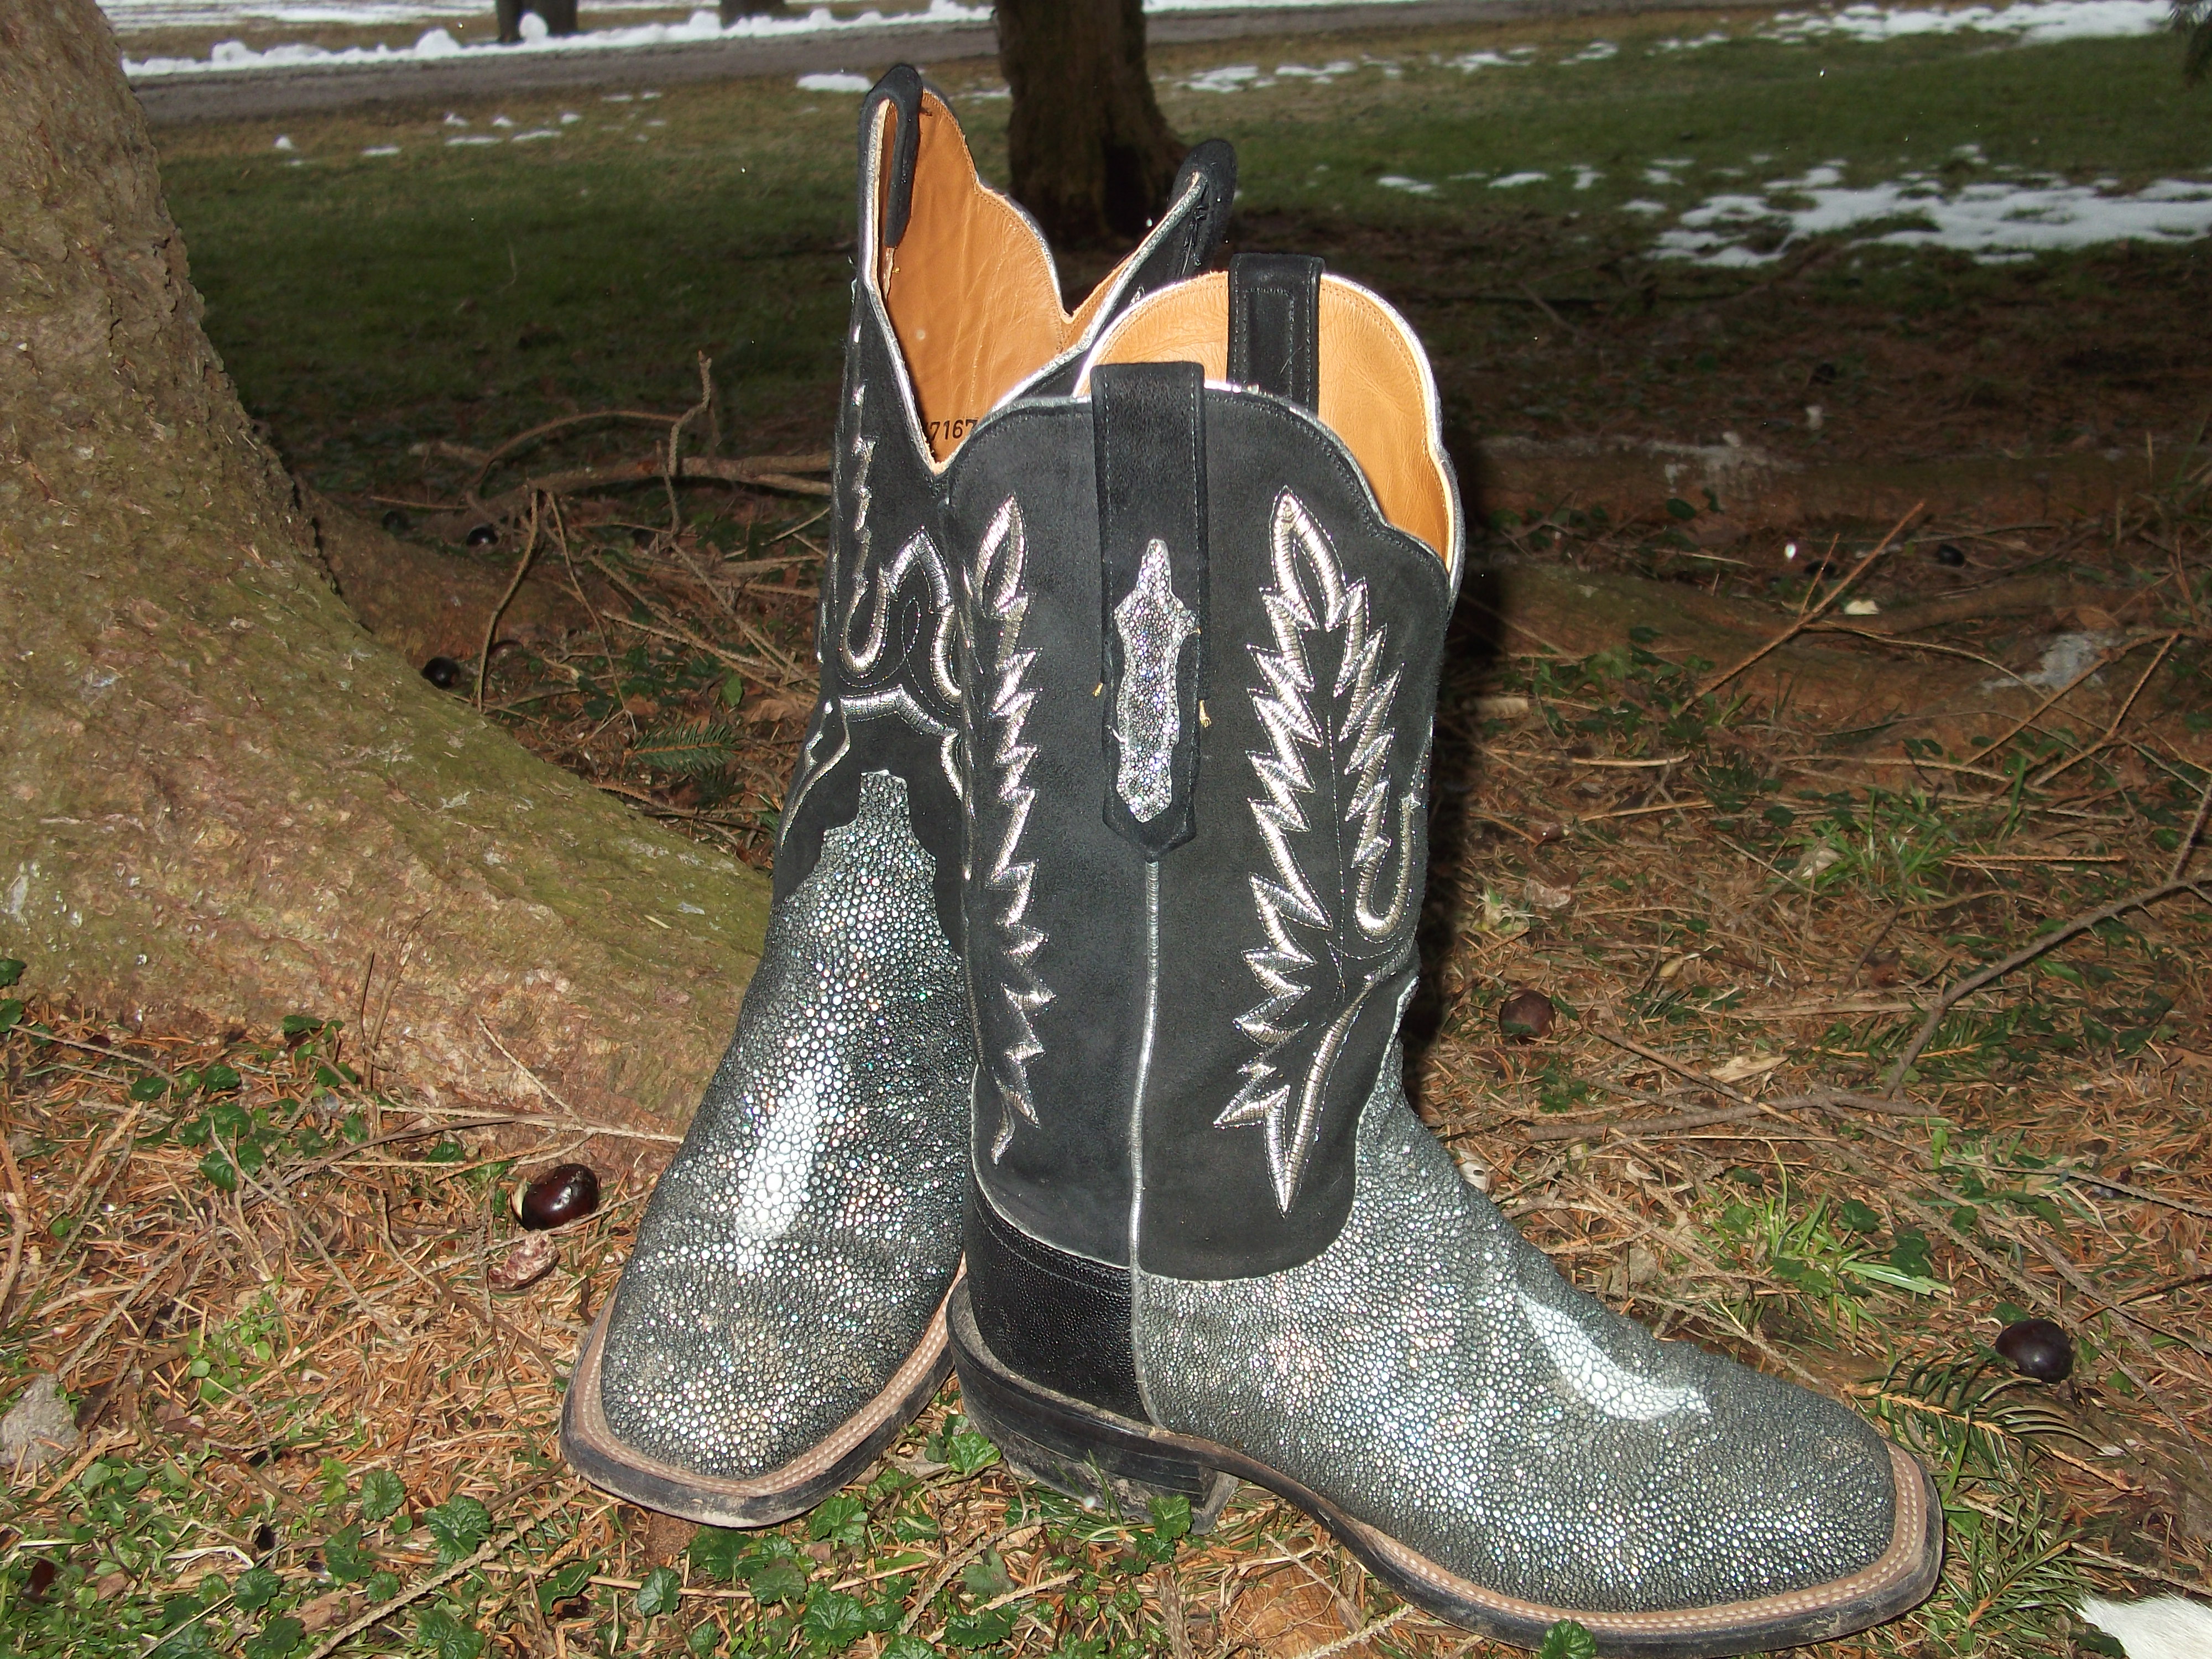 stingray cowboy boots lucchese